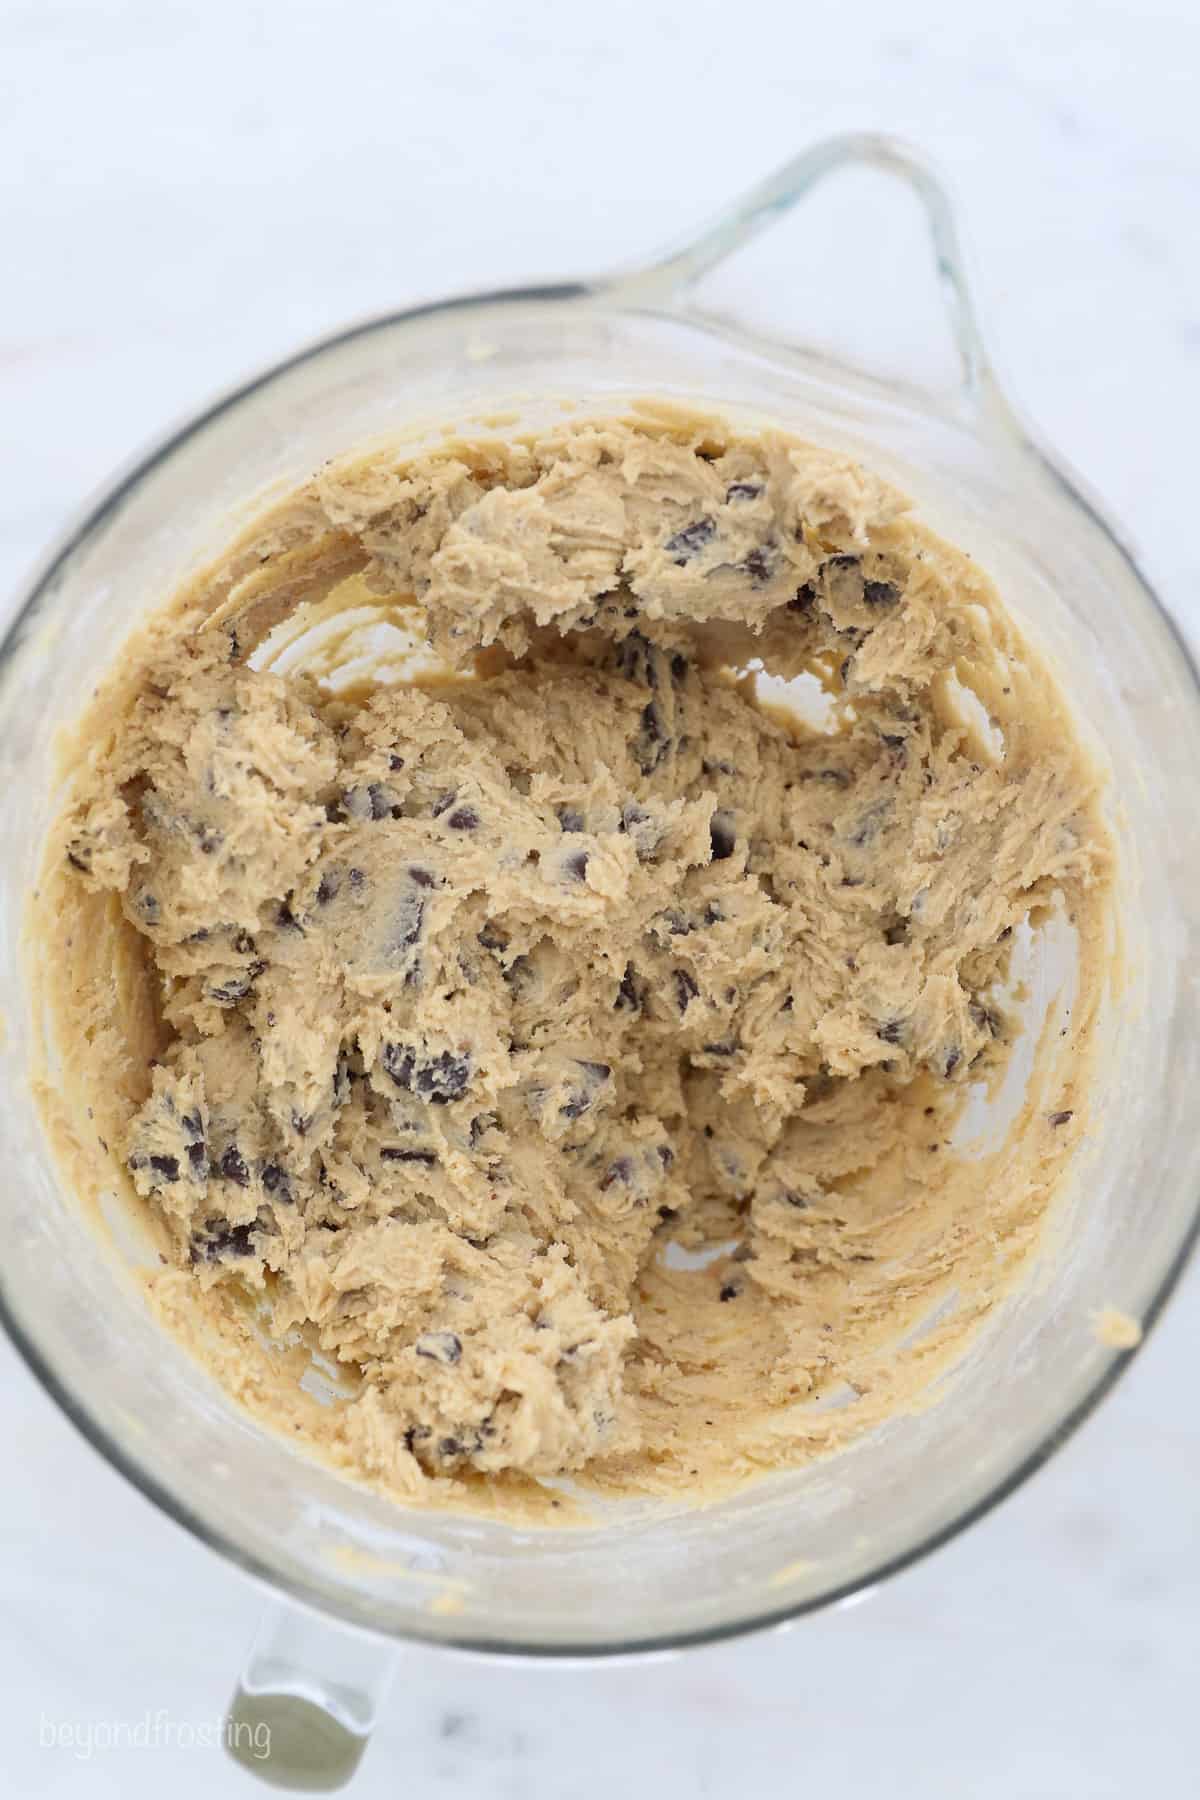 Chocolate chip cookies dough in a glass bowl.